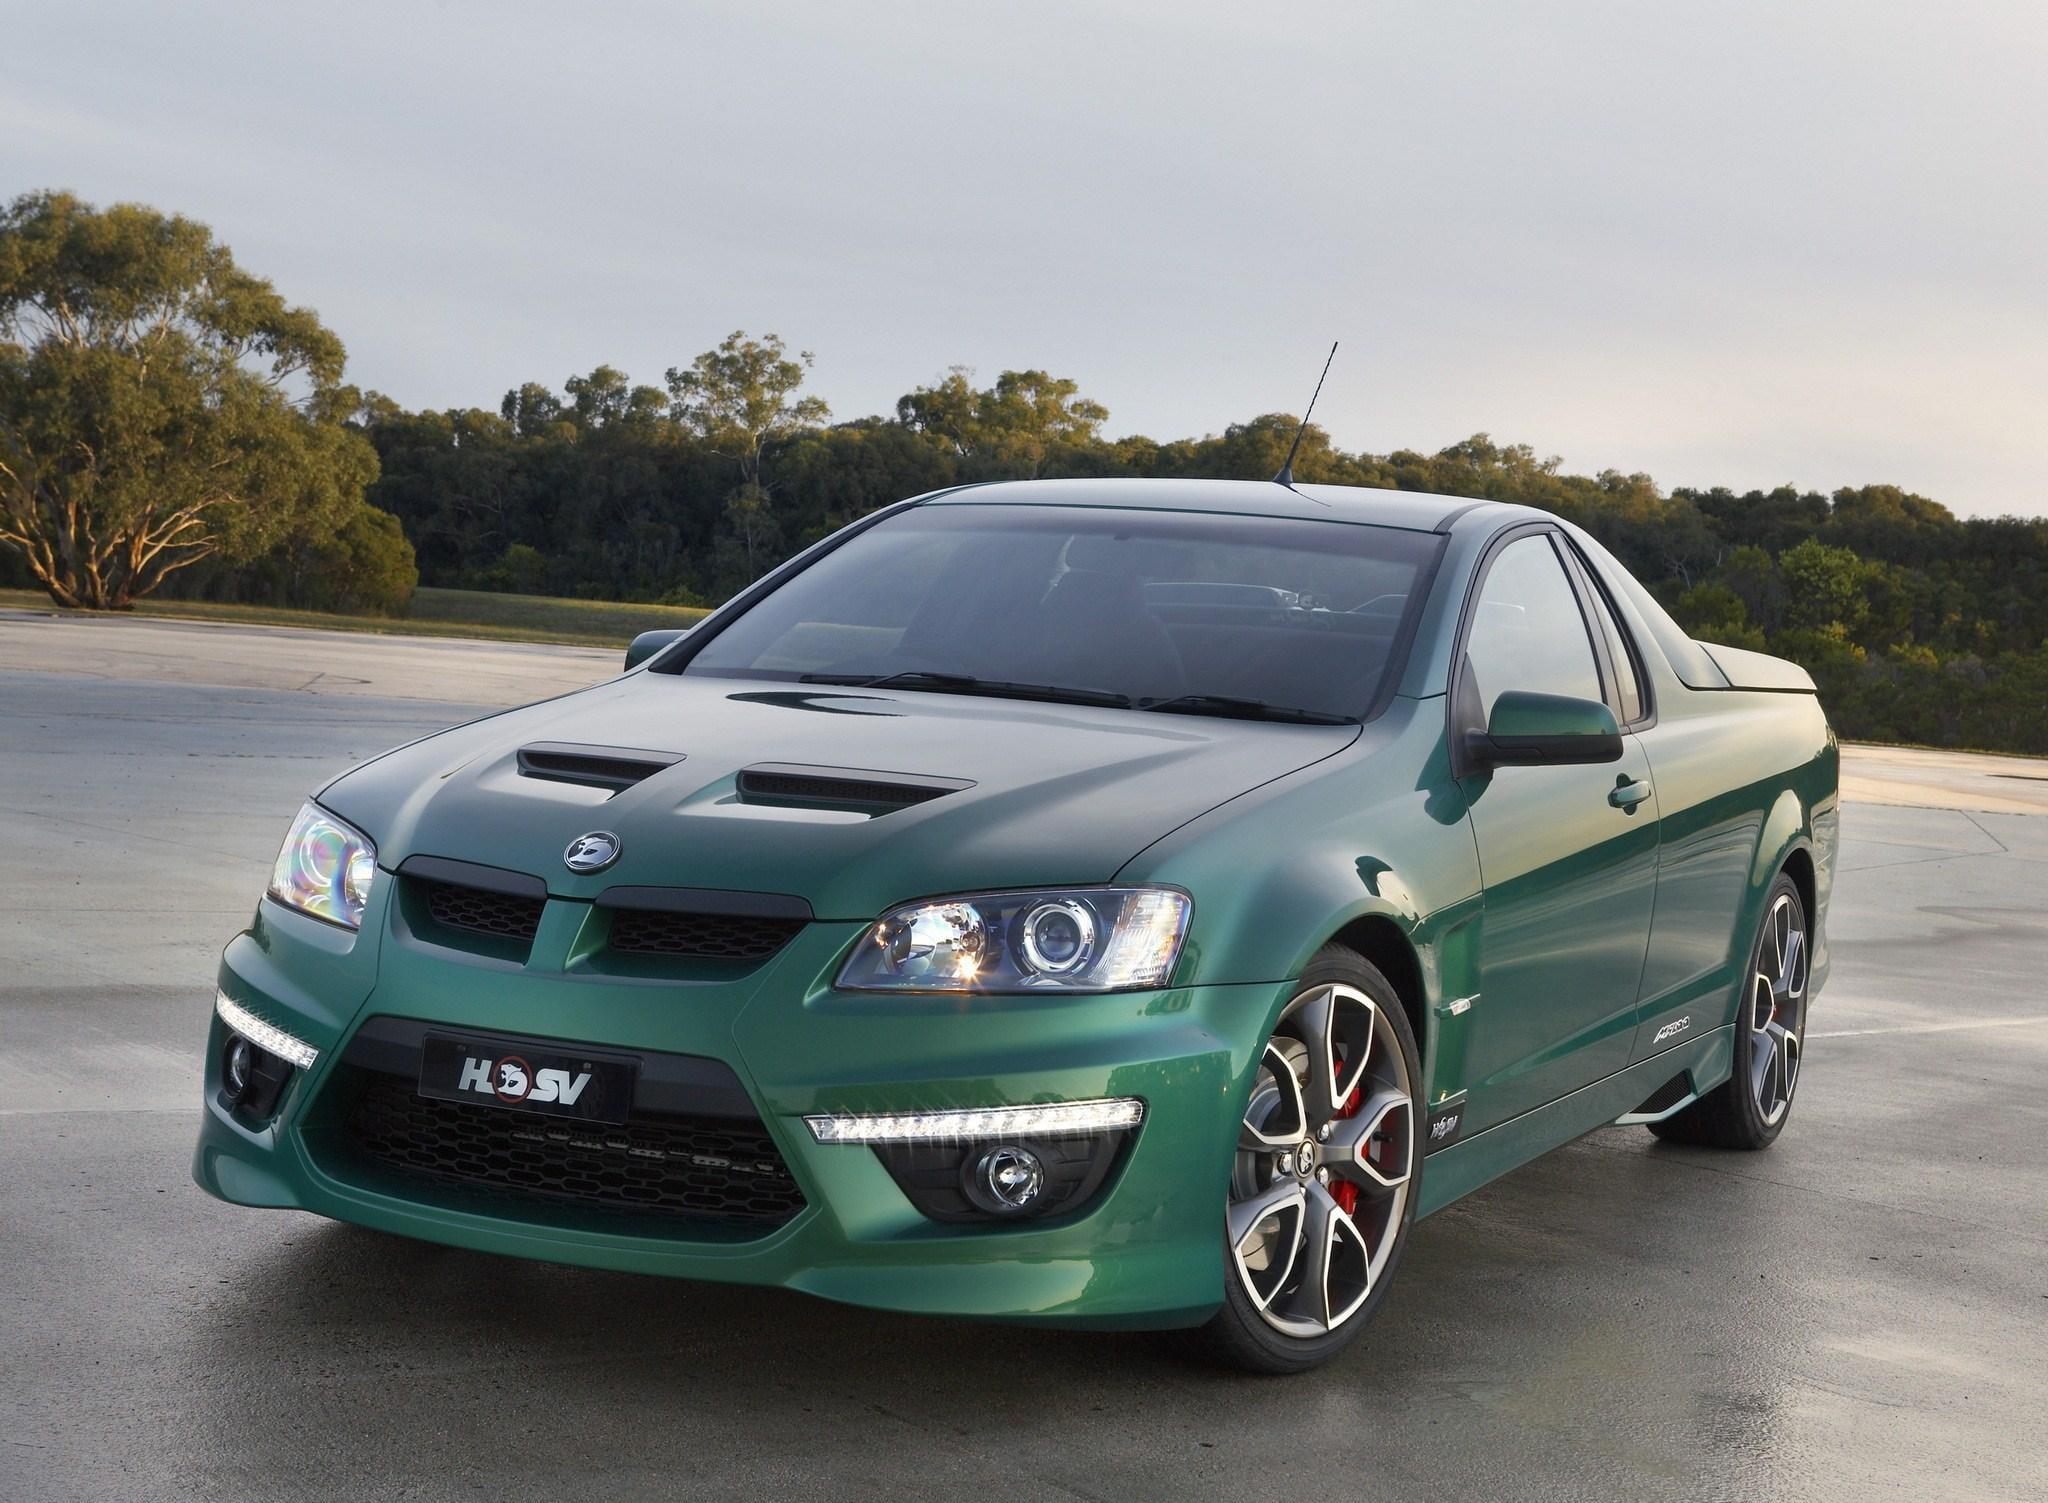 Holden Hsv Maloo R8 '2009, tuning, cars